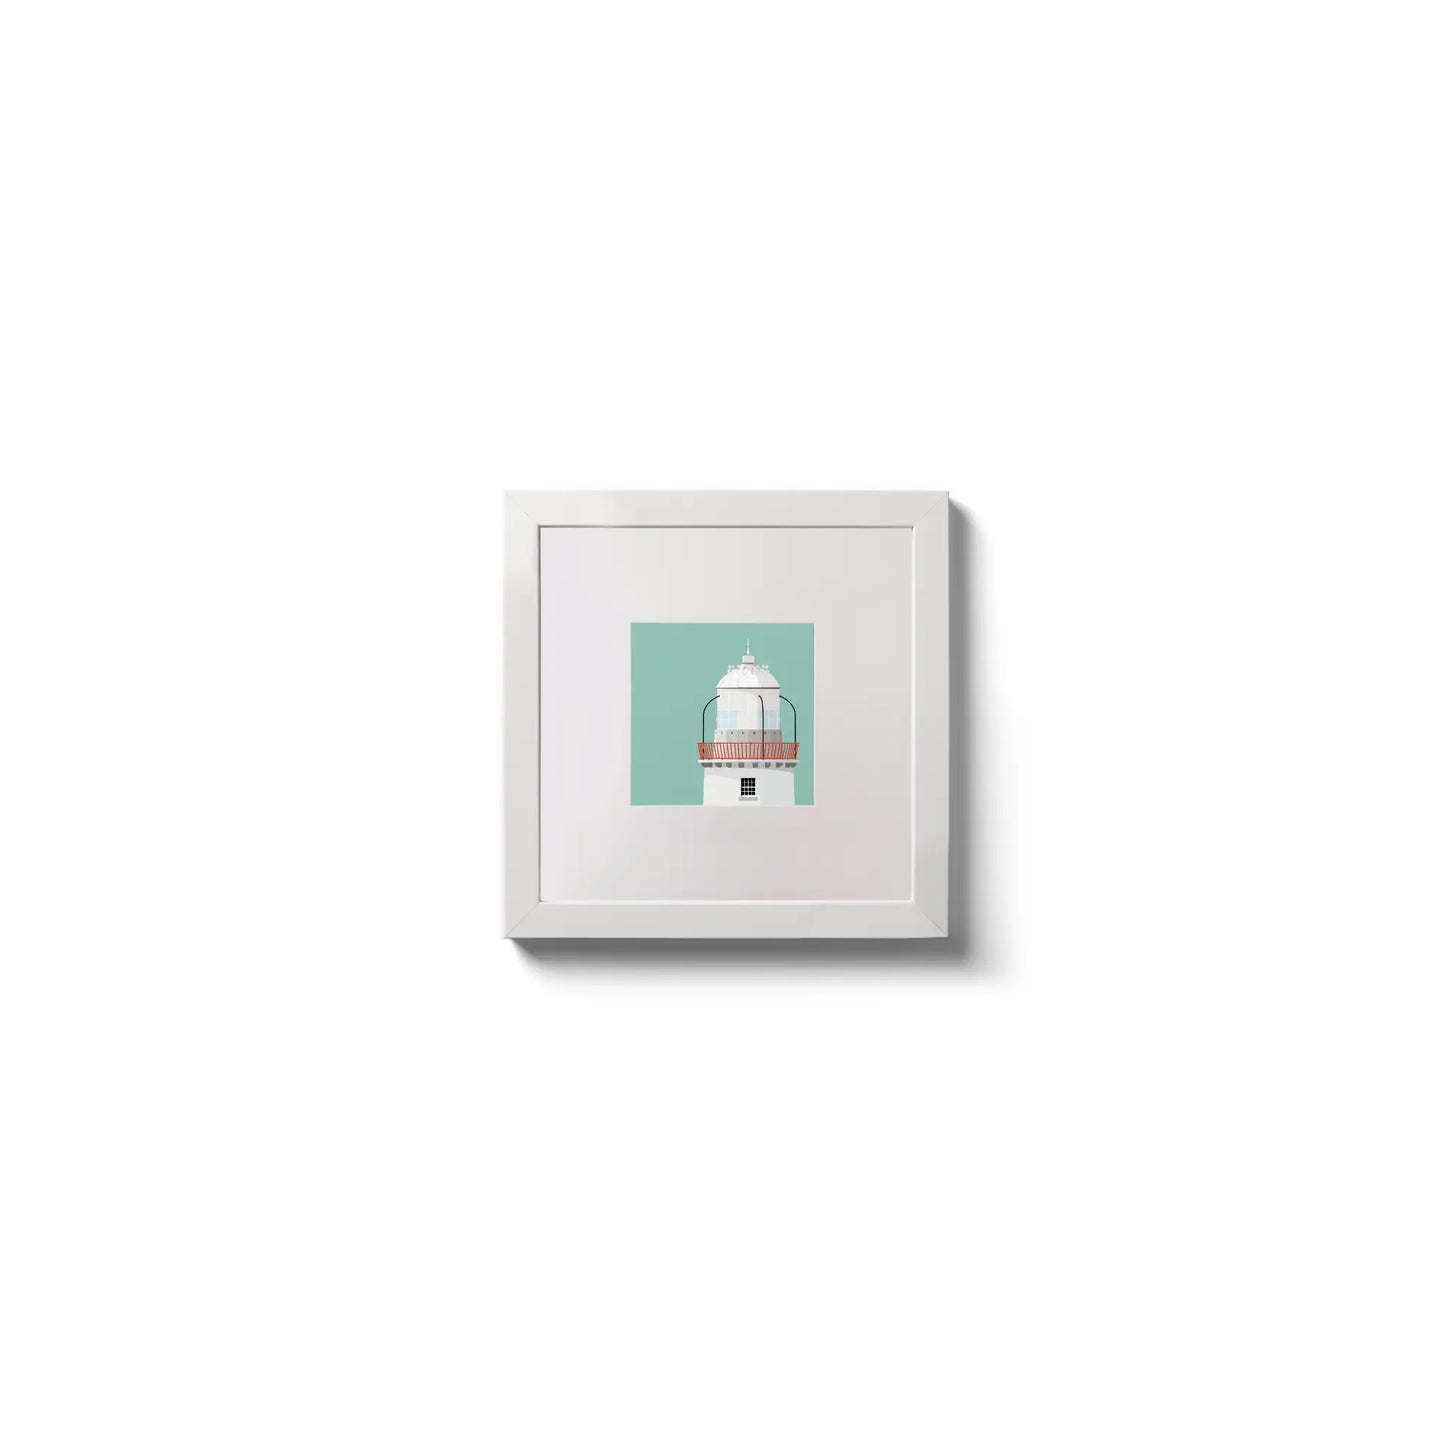 Illustration Rotten Island lighthouse on an ocean green background,  in a white square frame measuring 10x10cm.